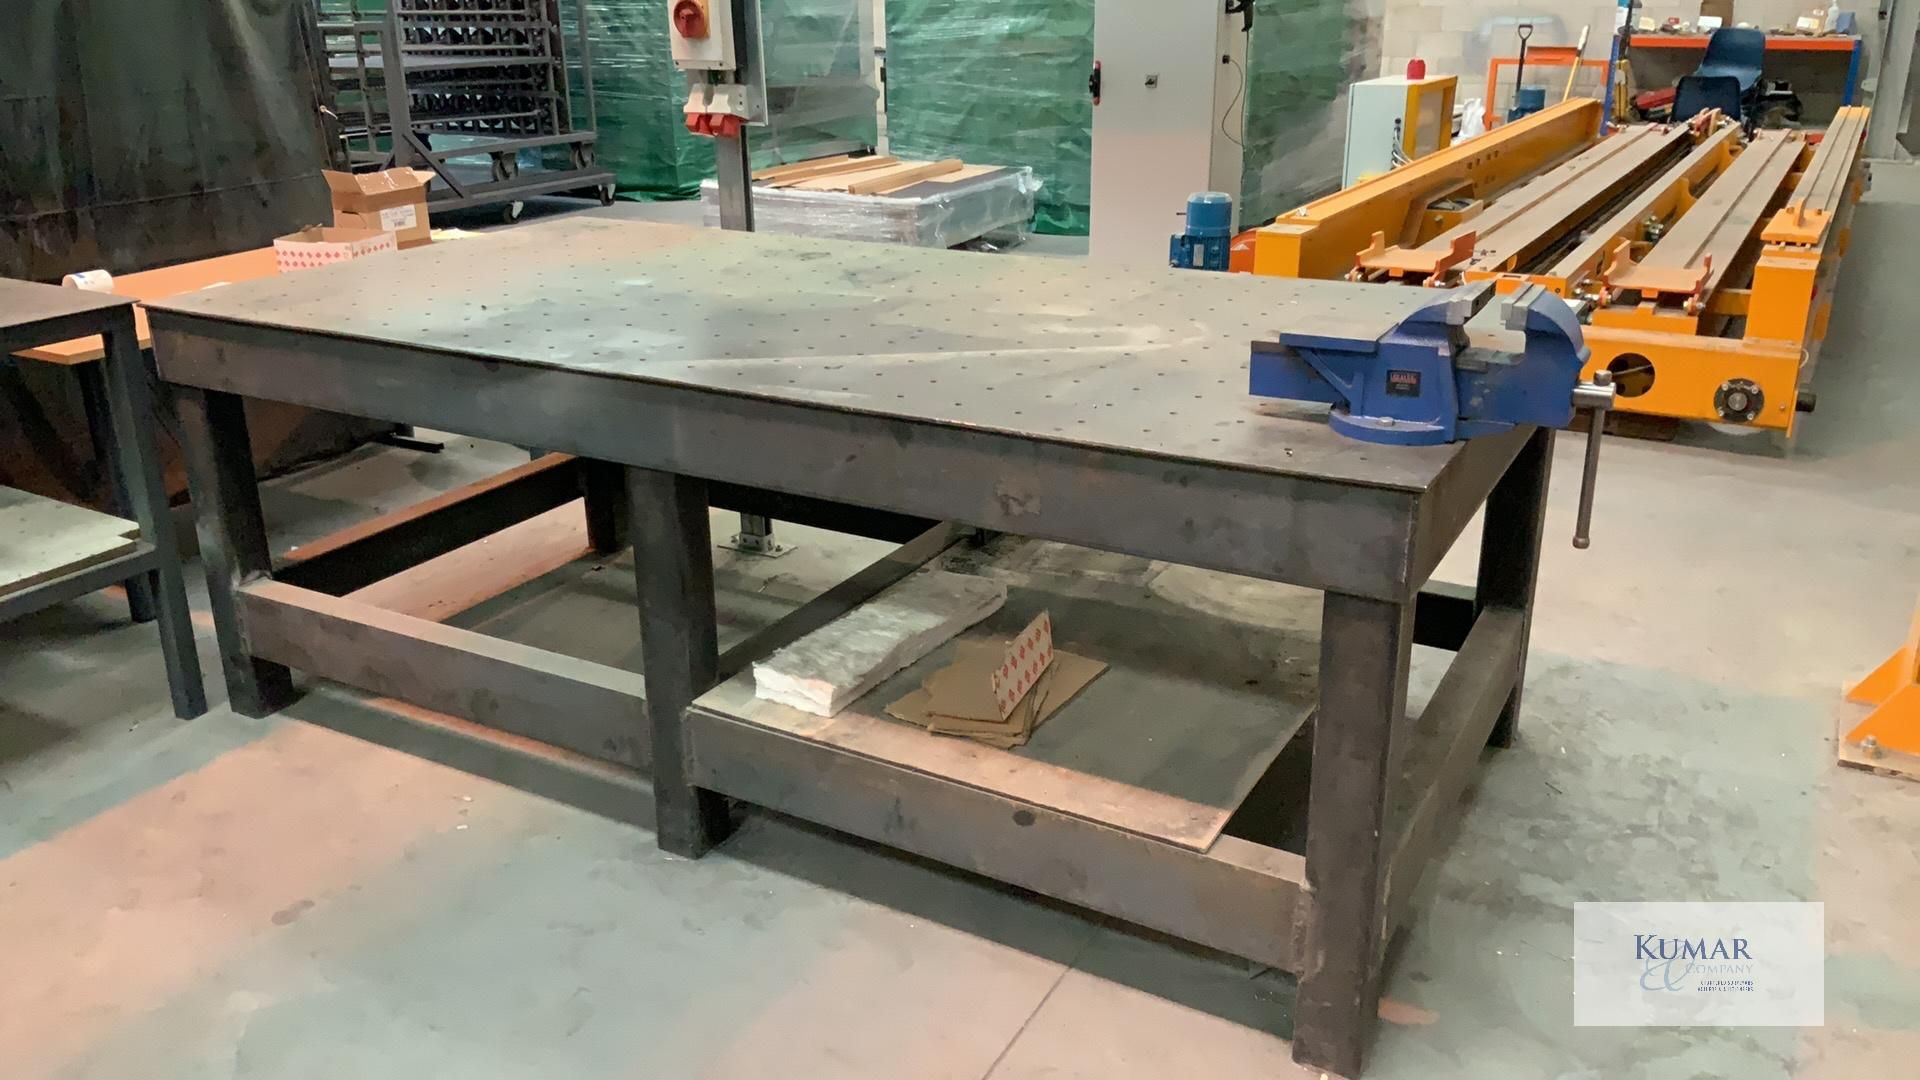 Specialist Welding Table with Bench Vice - Dimensions 250cm x 126cm x90cm Height - Please Note